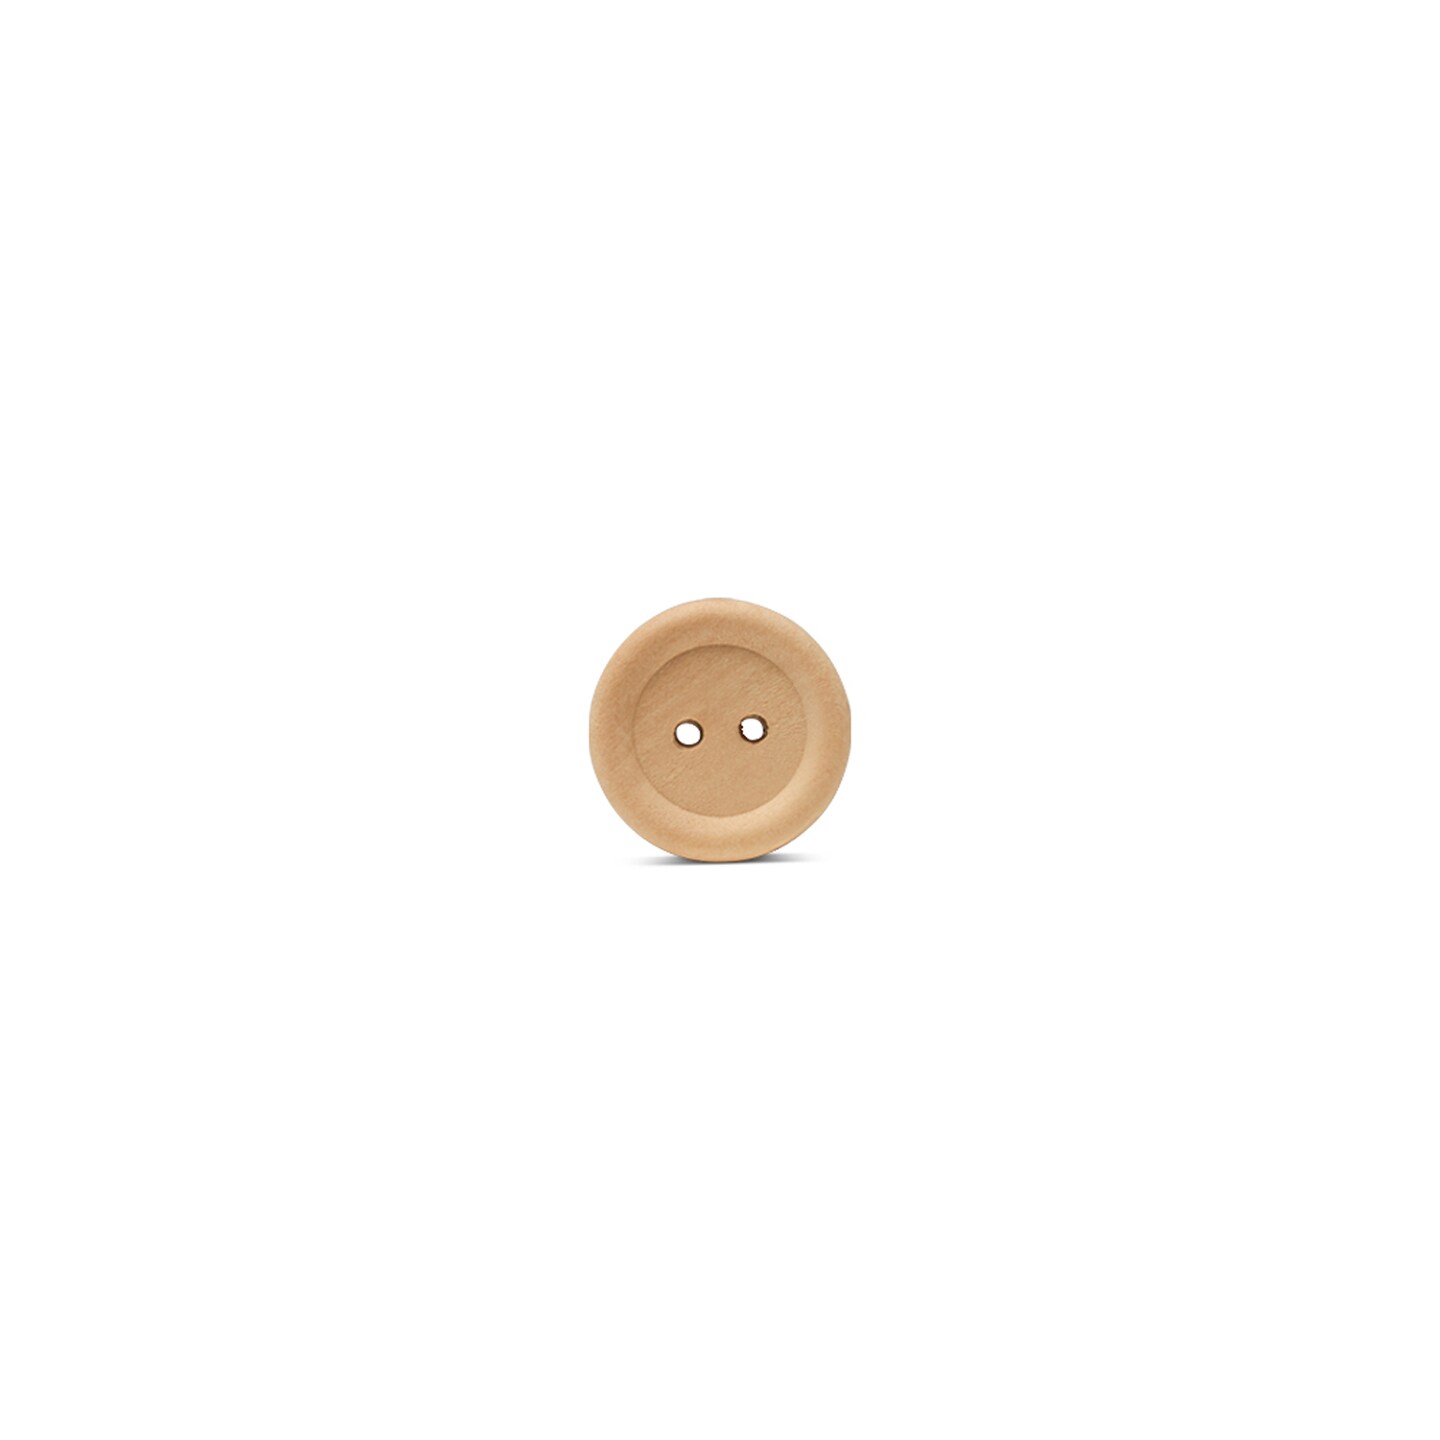 Unfinished Wooden Buttons for Crafts and Sewing Multiple Sizes Available | Woodpeckers